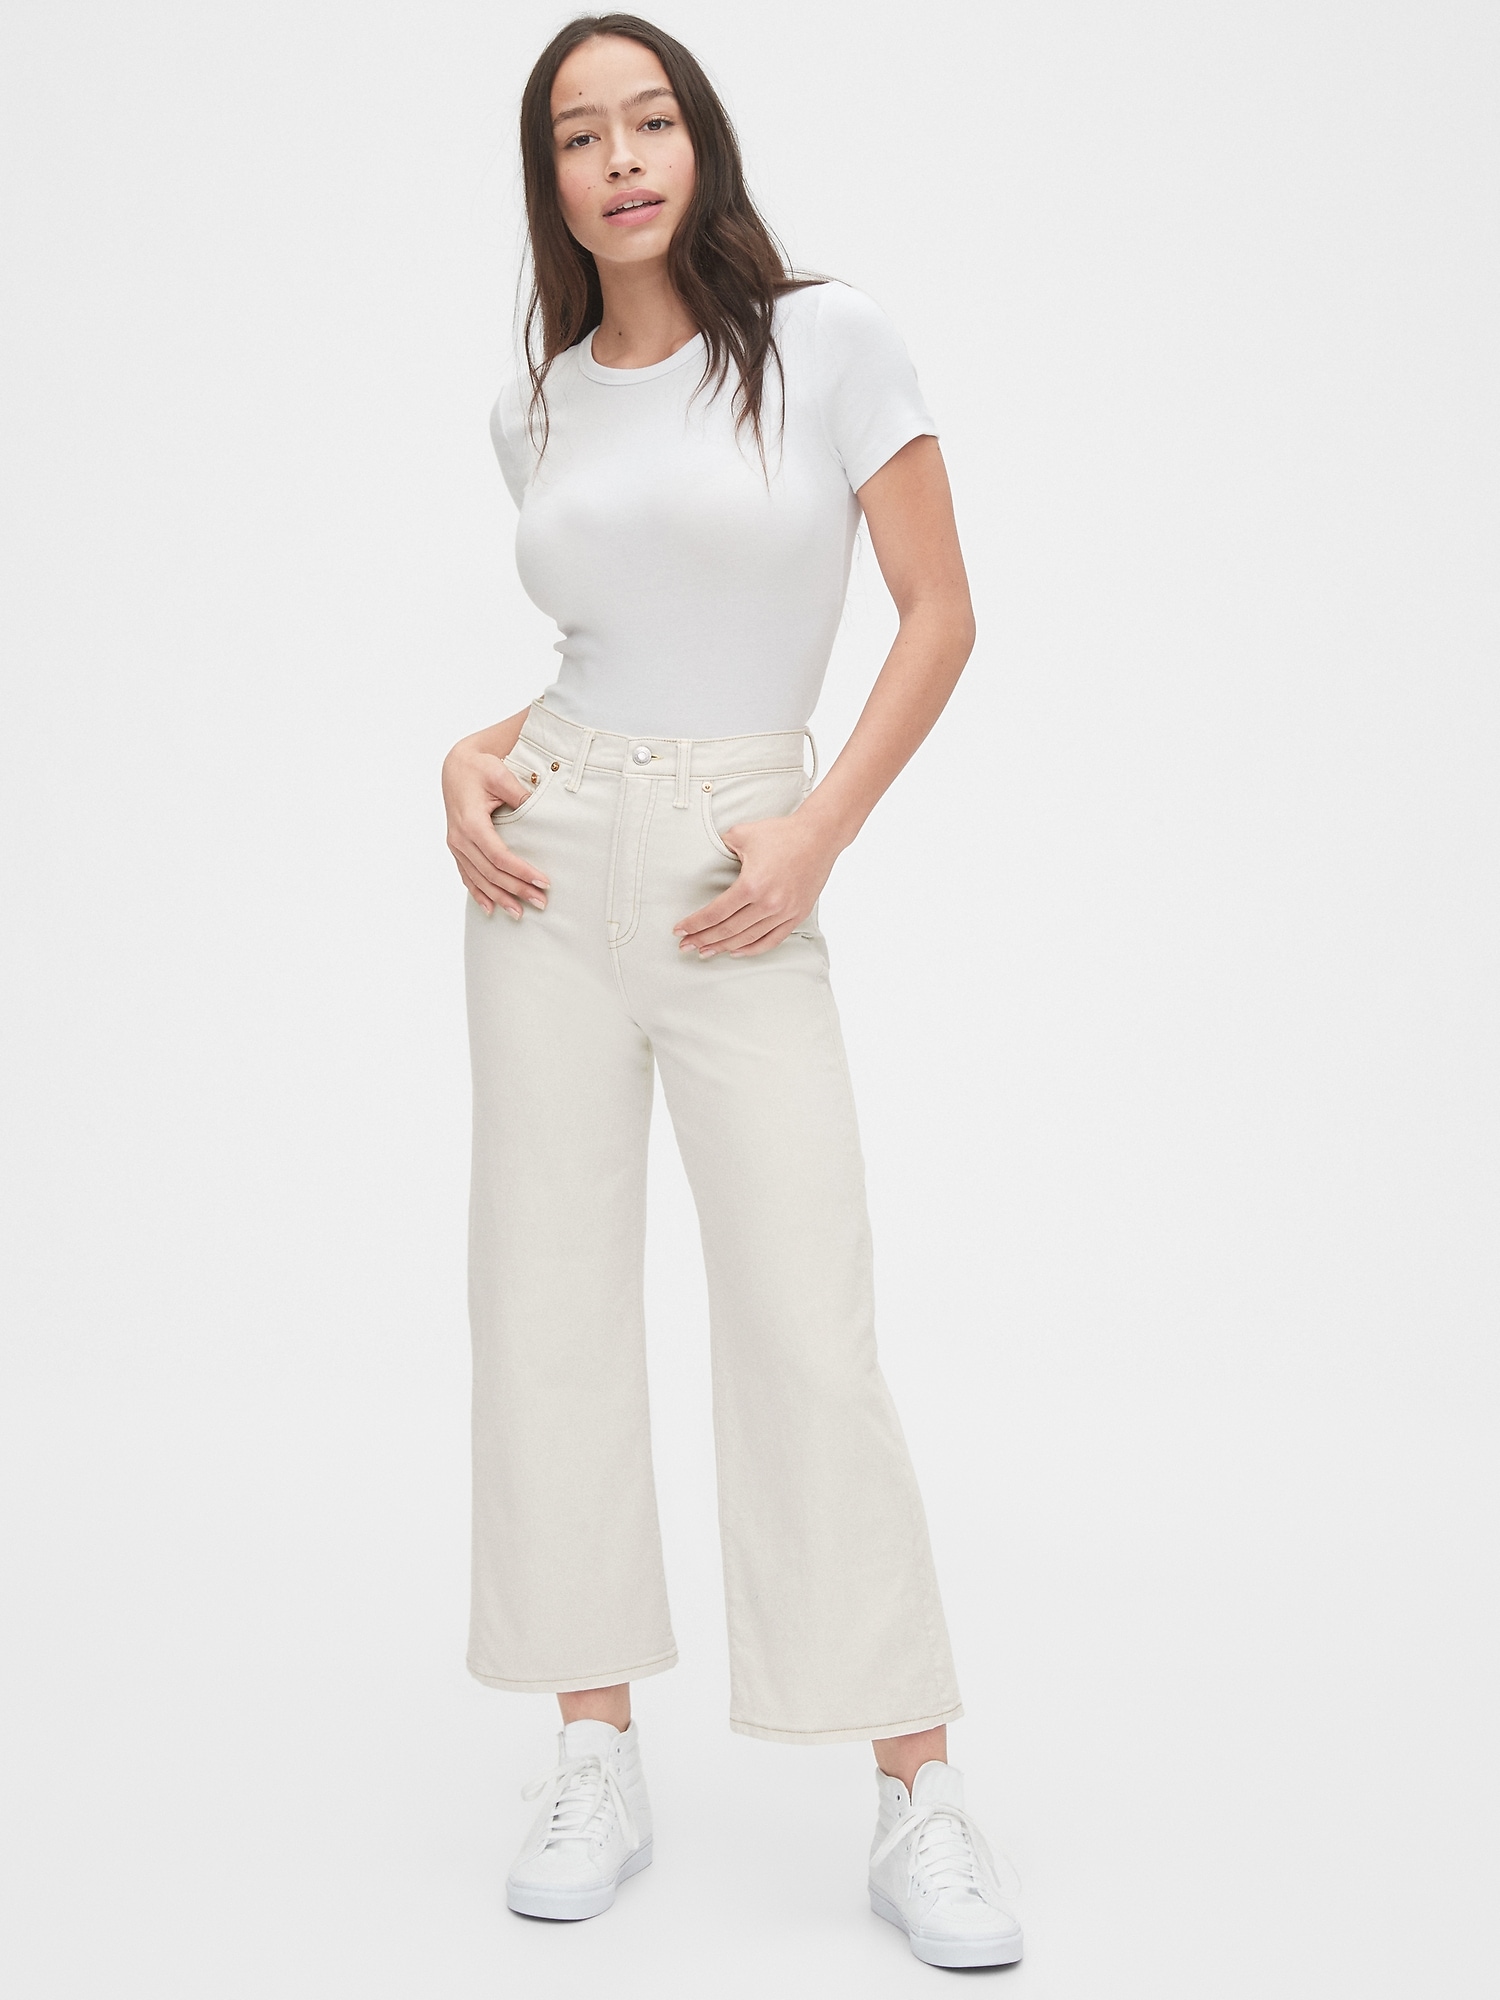 white wide leg cropped jeans